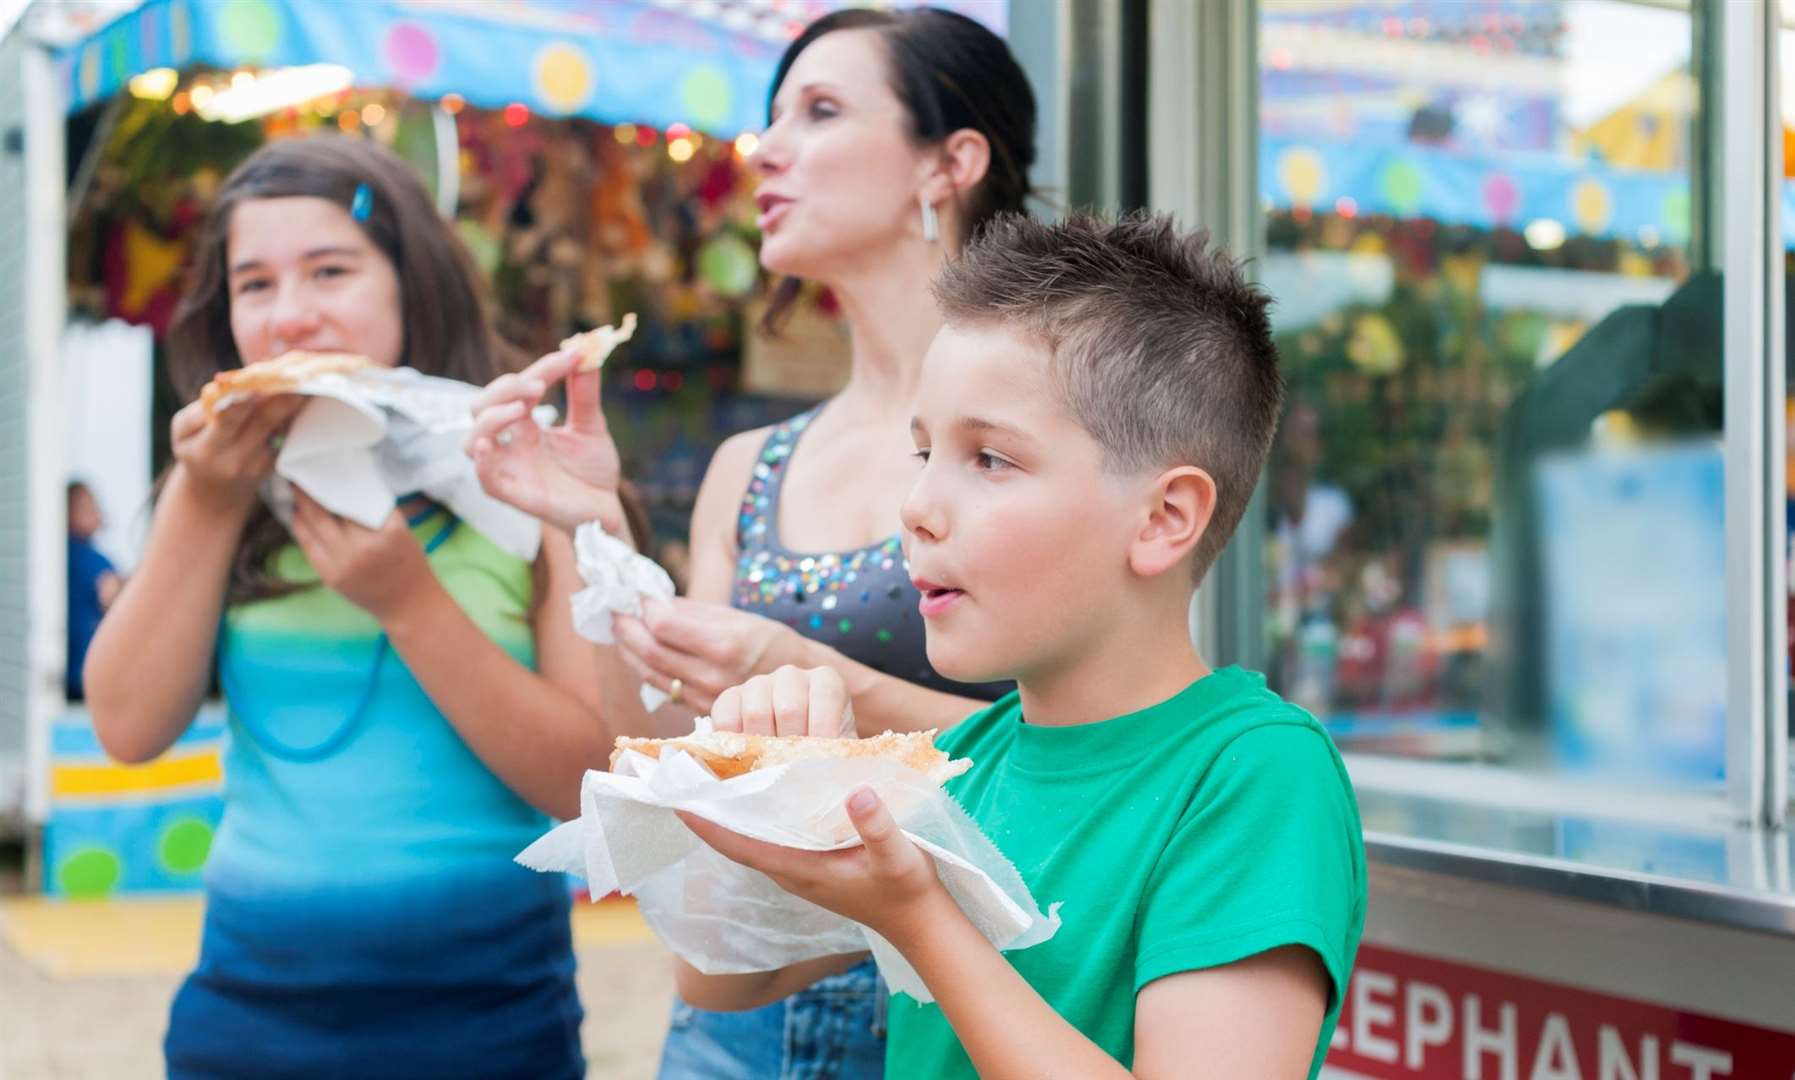 There will also be food, drink, family activities and a market. Picture: iStock